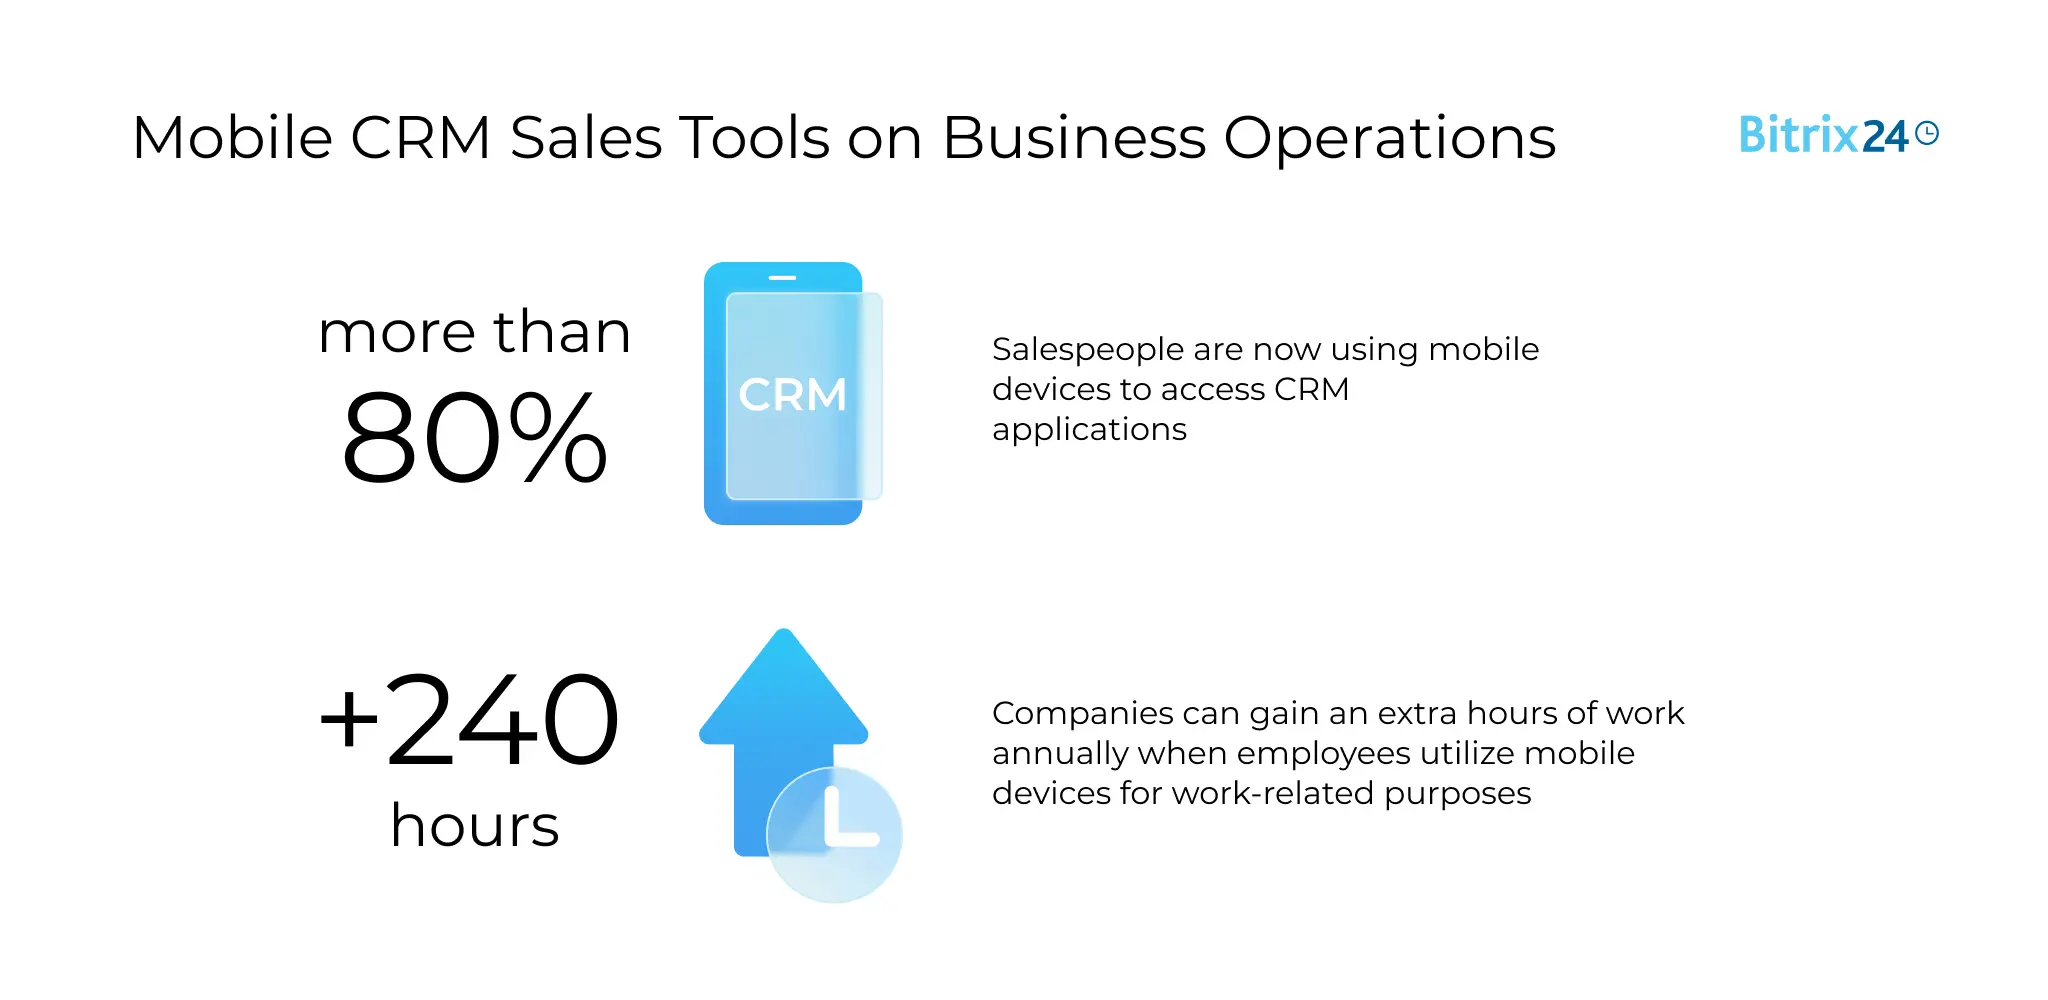 Mobile CRM Sales Tools on Business Operations